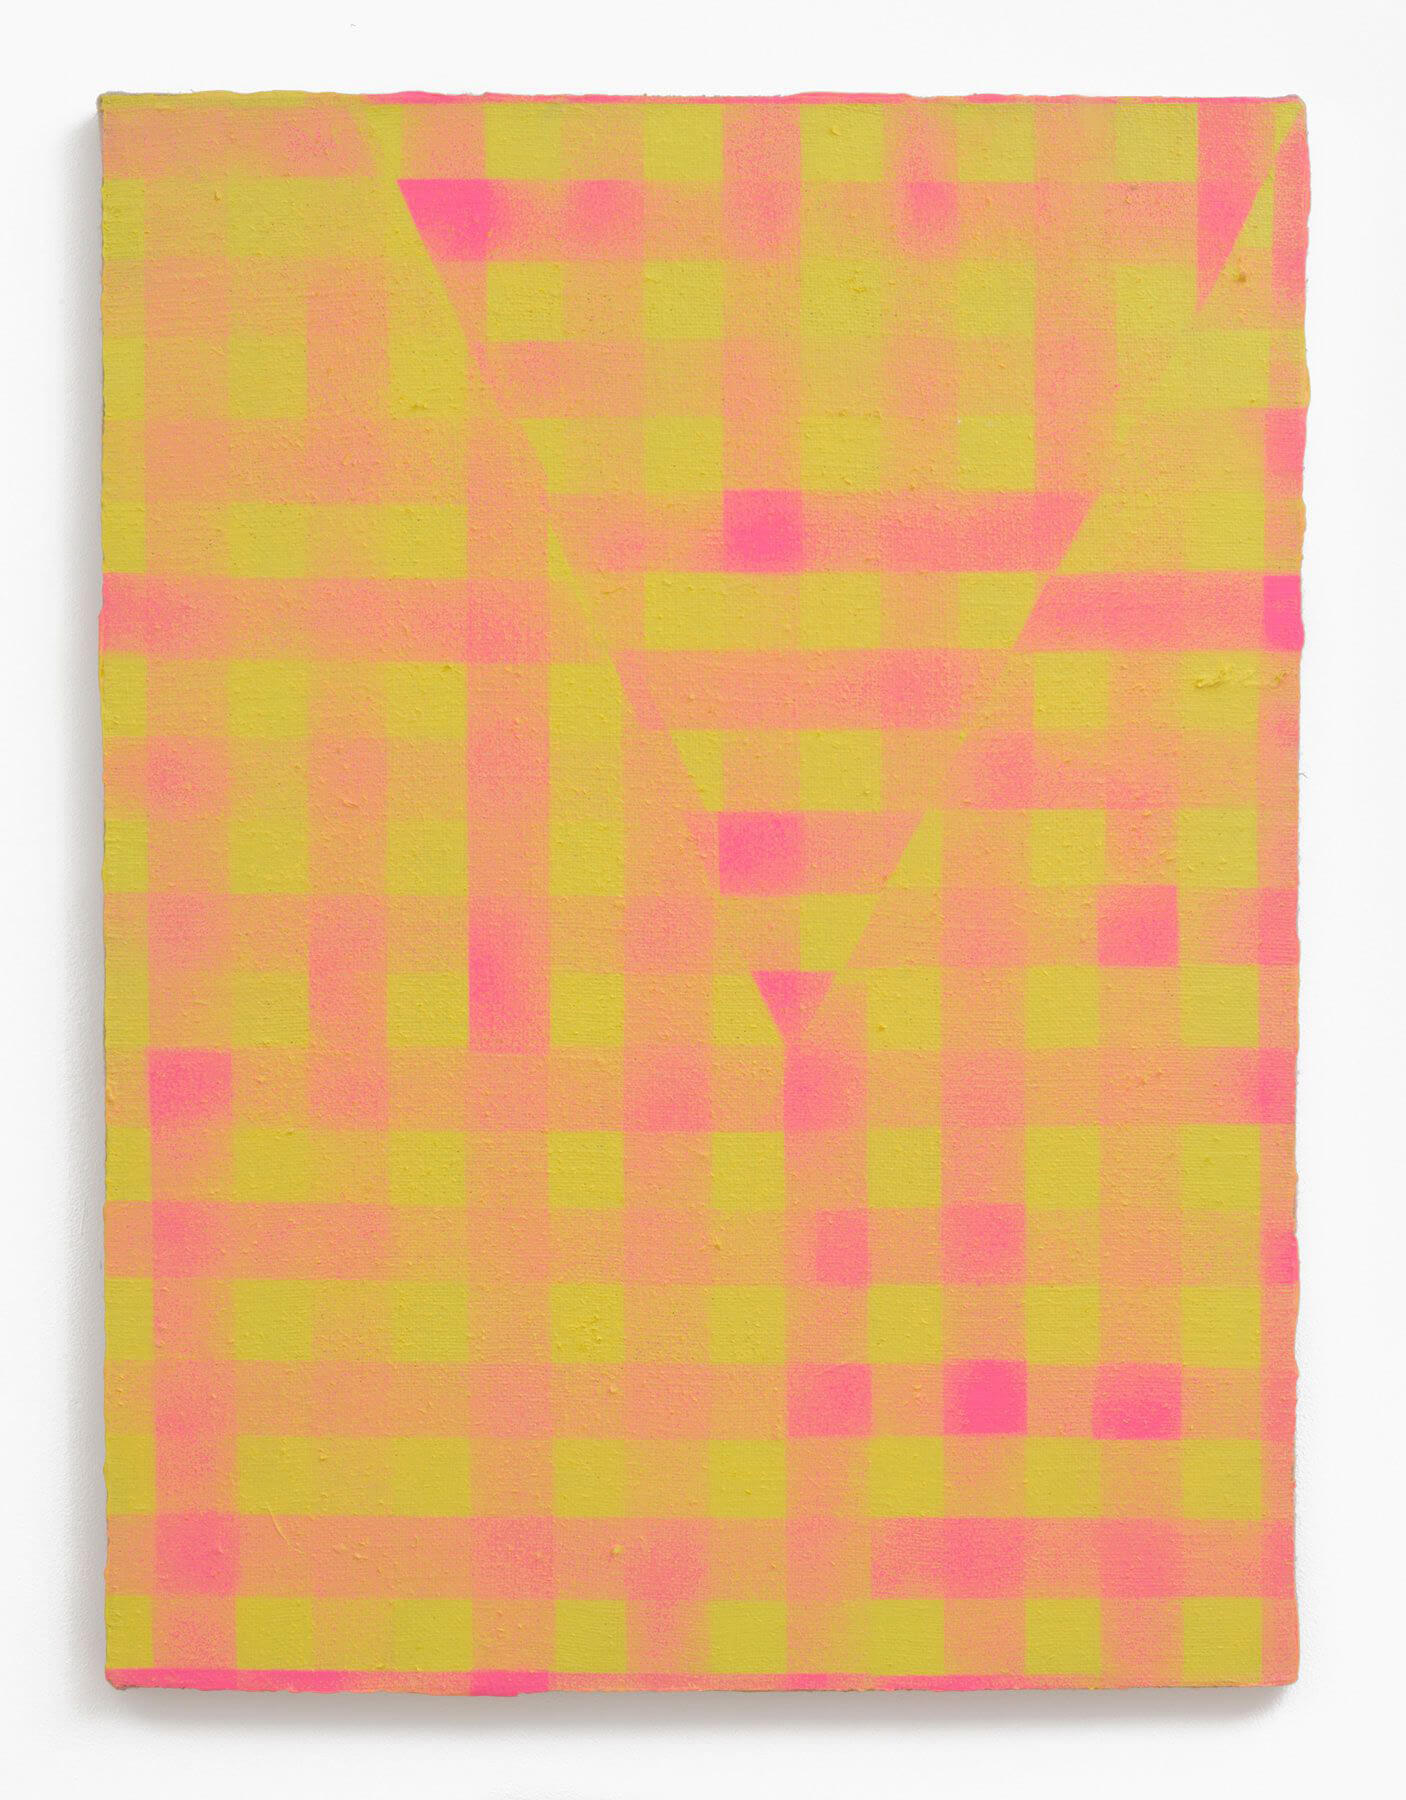 Cheryl Donegan
                                        'Untitled (yellow and hot pink)', 2013
                                        40 x 30 Inches
                                        acrylic on jute
                                        